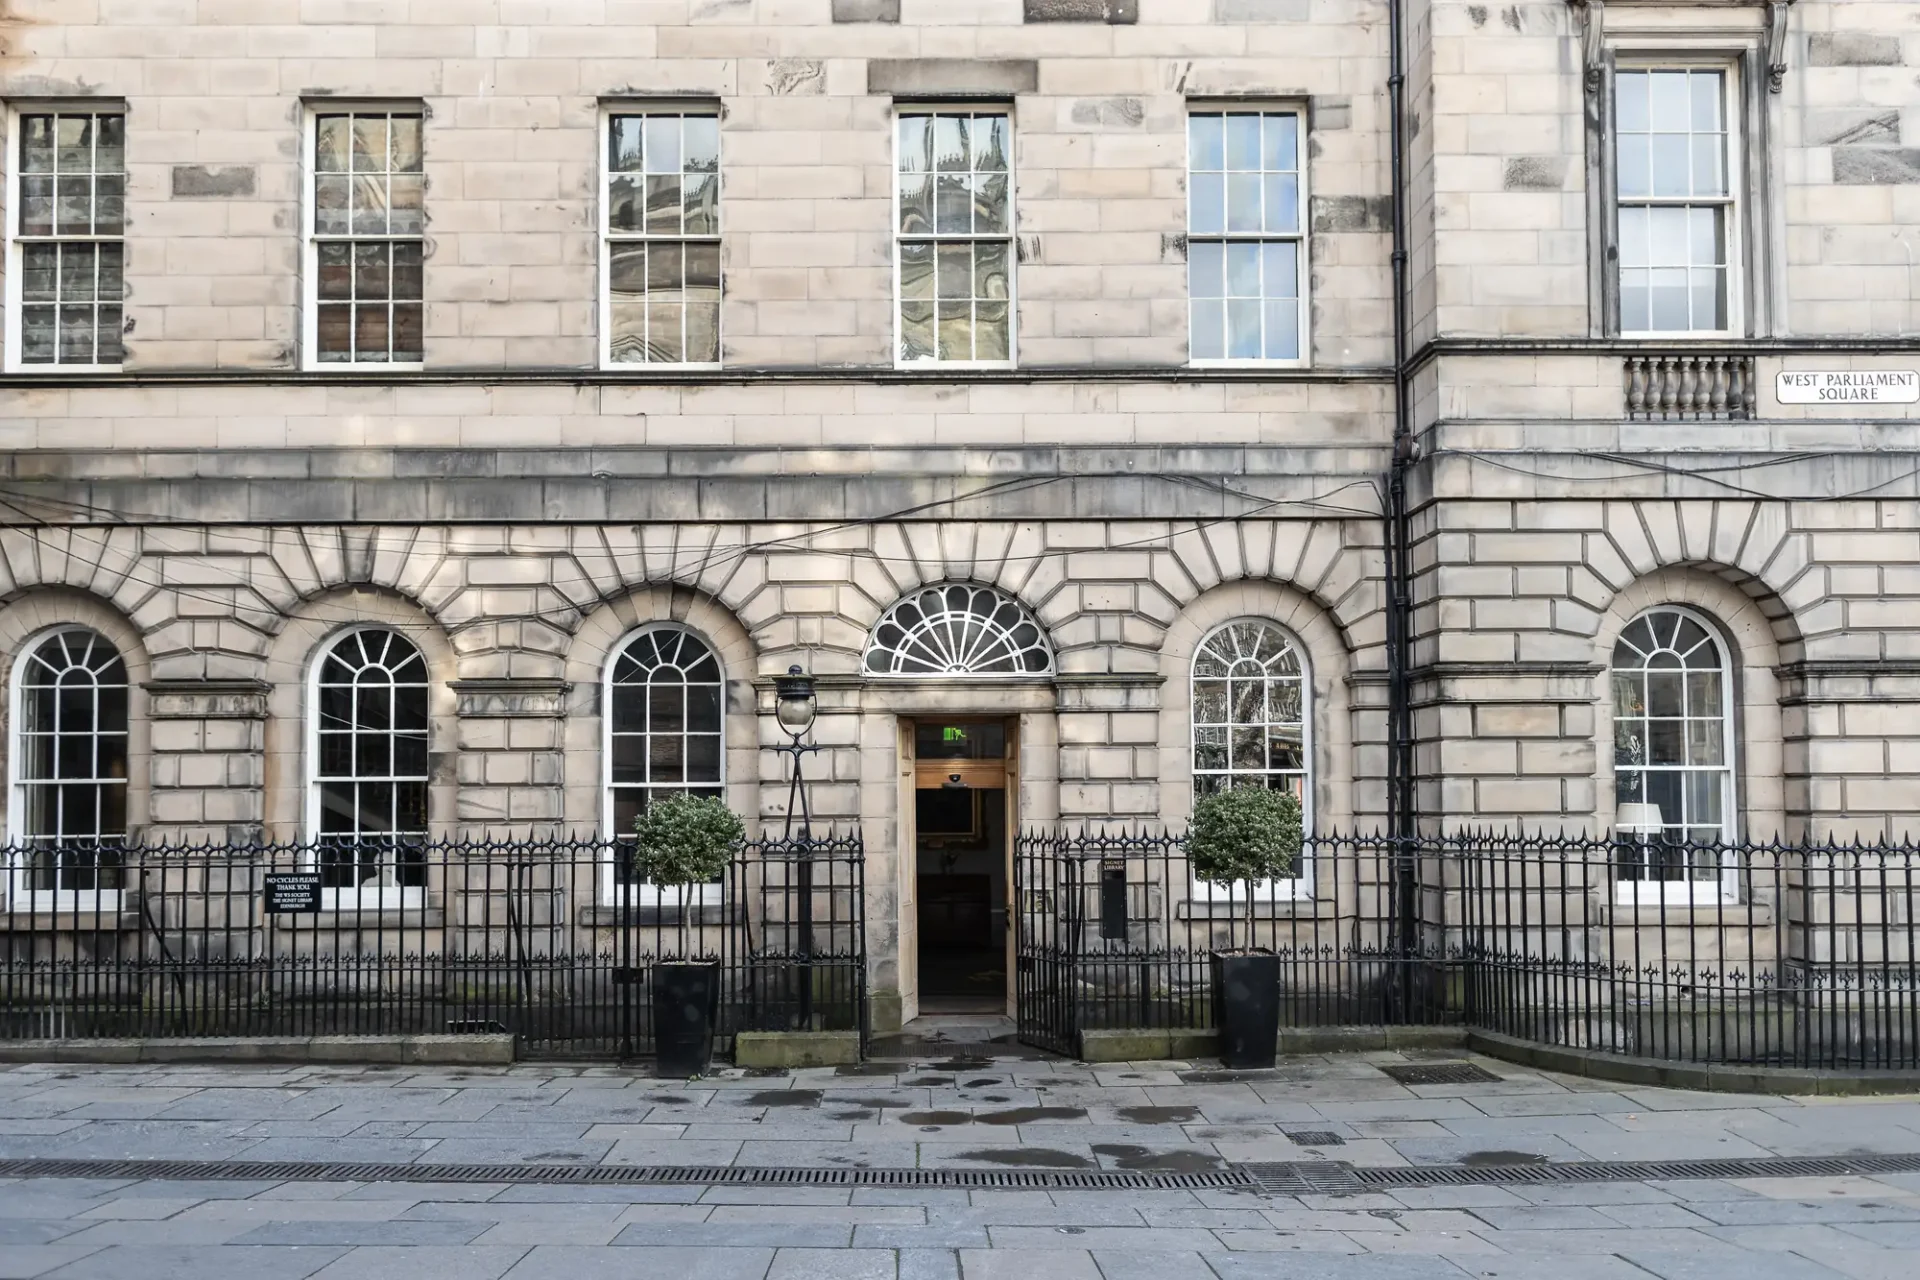 An elegant entrance to a stone building with arched doorways, metal security gates, and a sign reading "st. andrew square edinburgh".